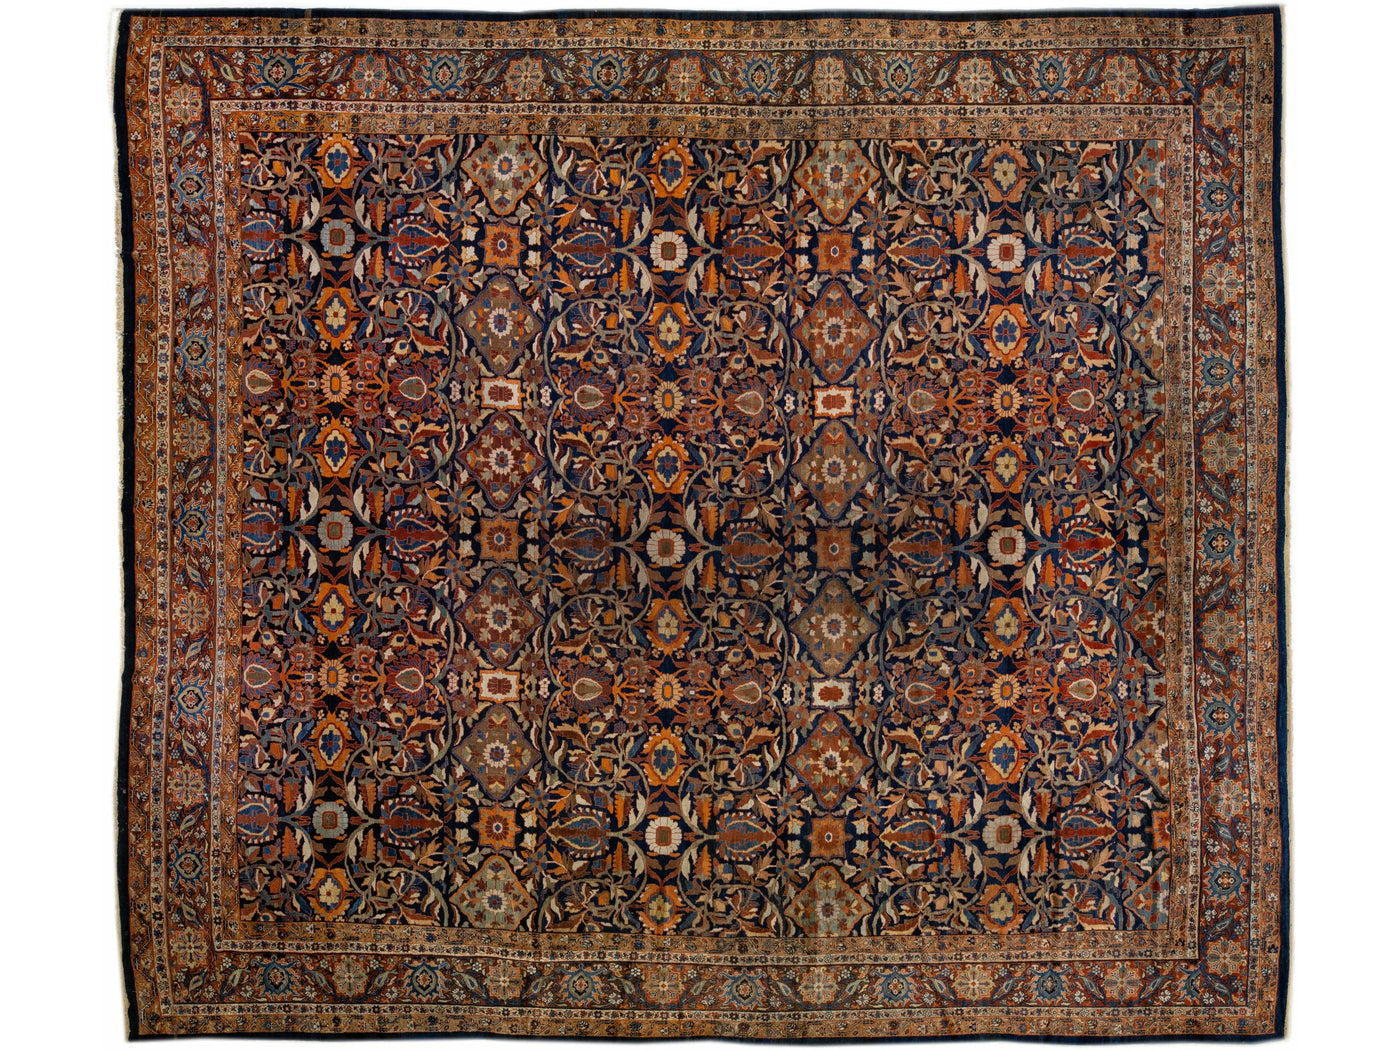 Oversize Antique Sultanabad Multicolor Handmade Allover Floral Persian Wool Rug